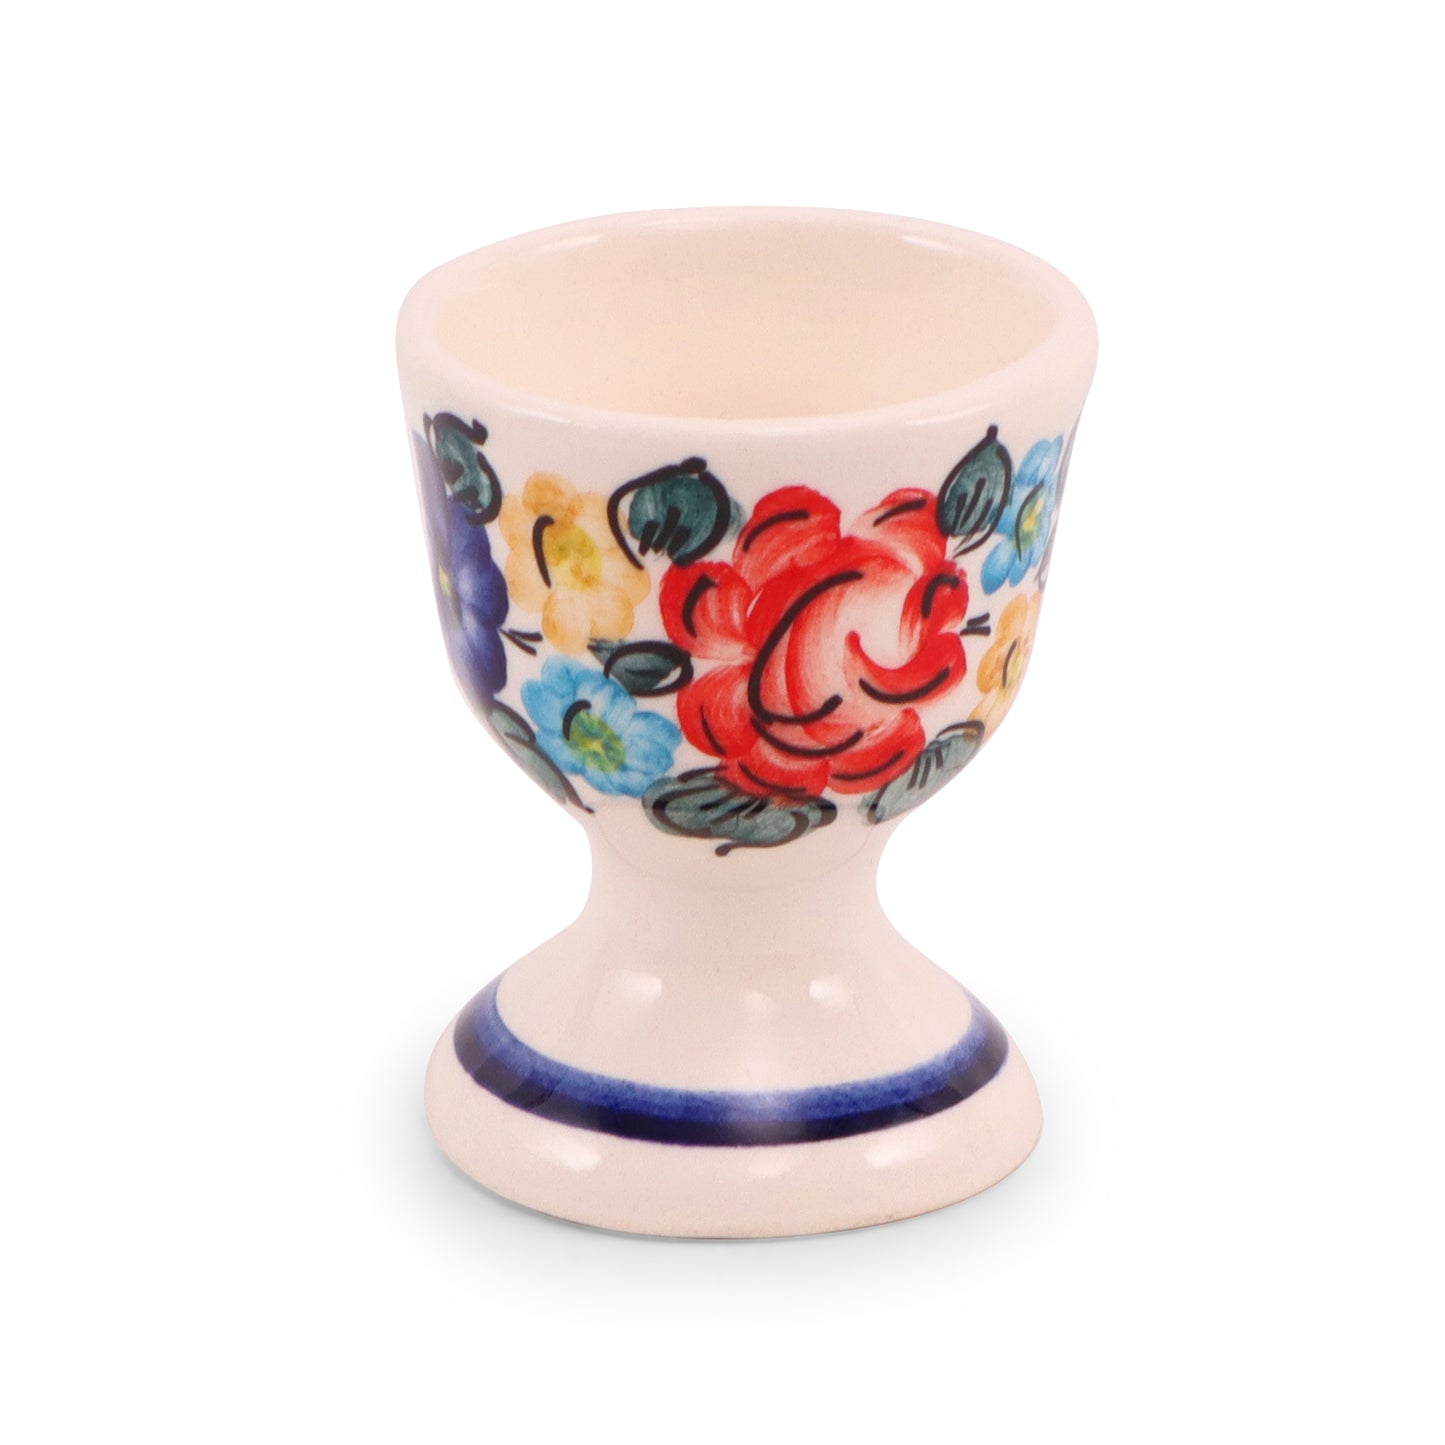 2"x2.5" Egg Cup. Pattern: Colorful